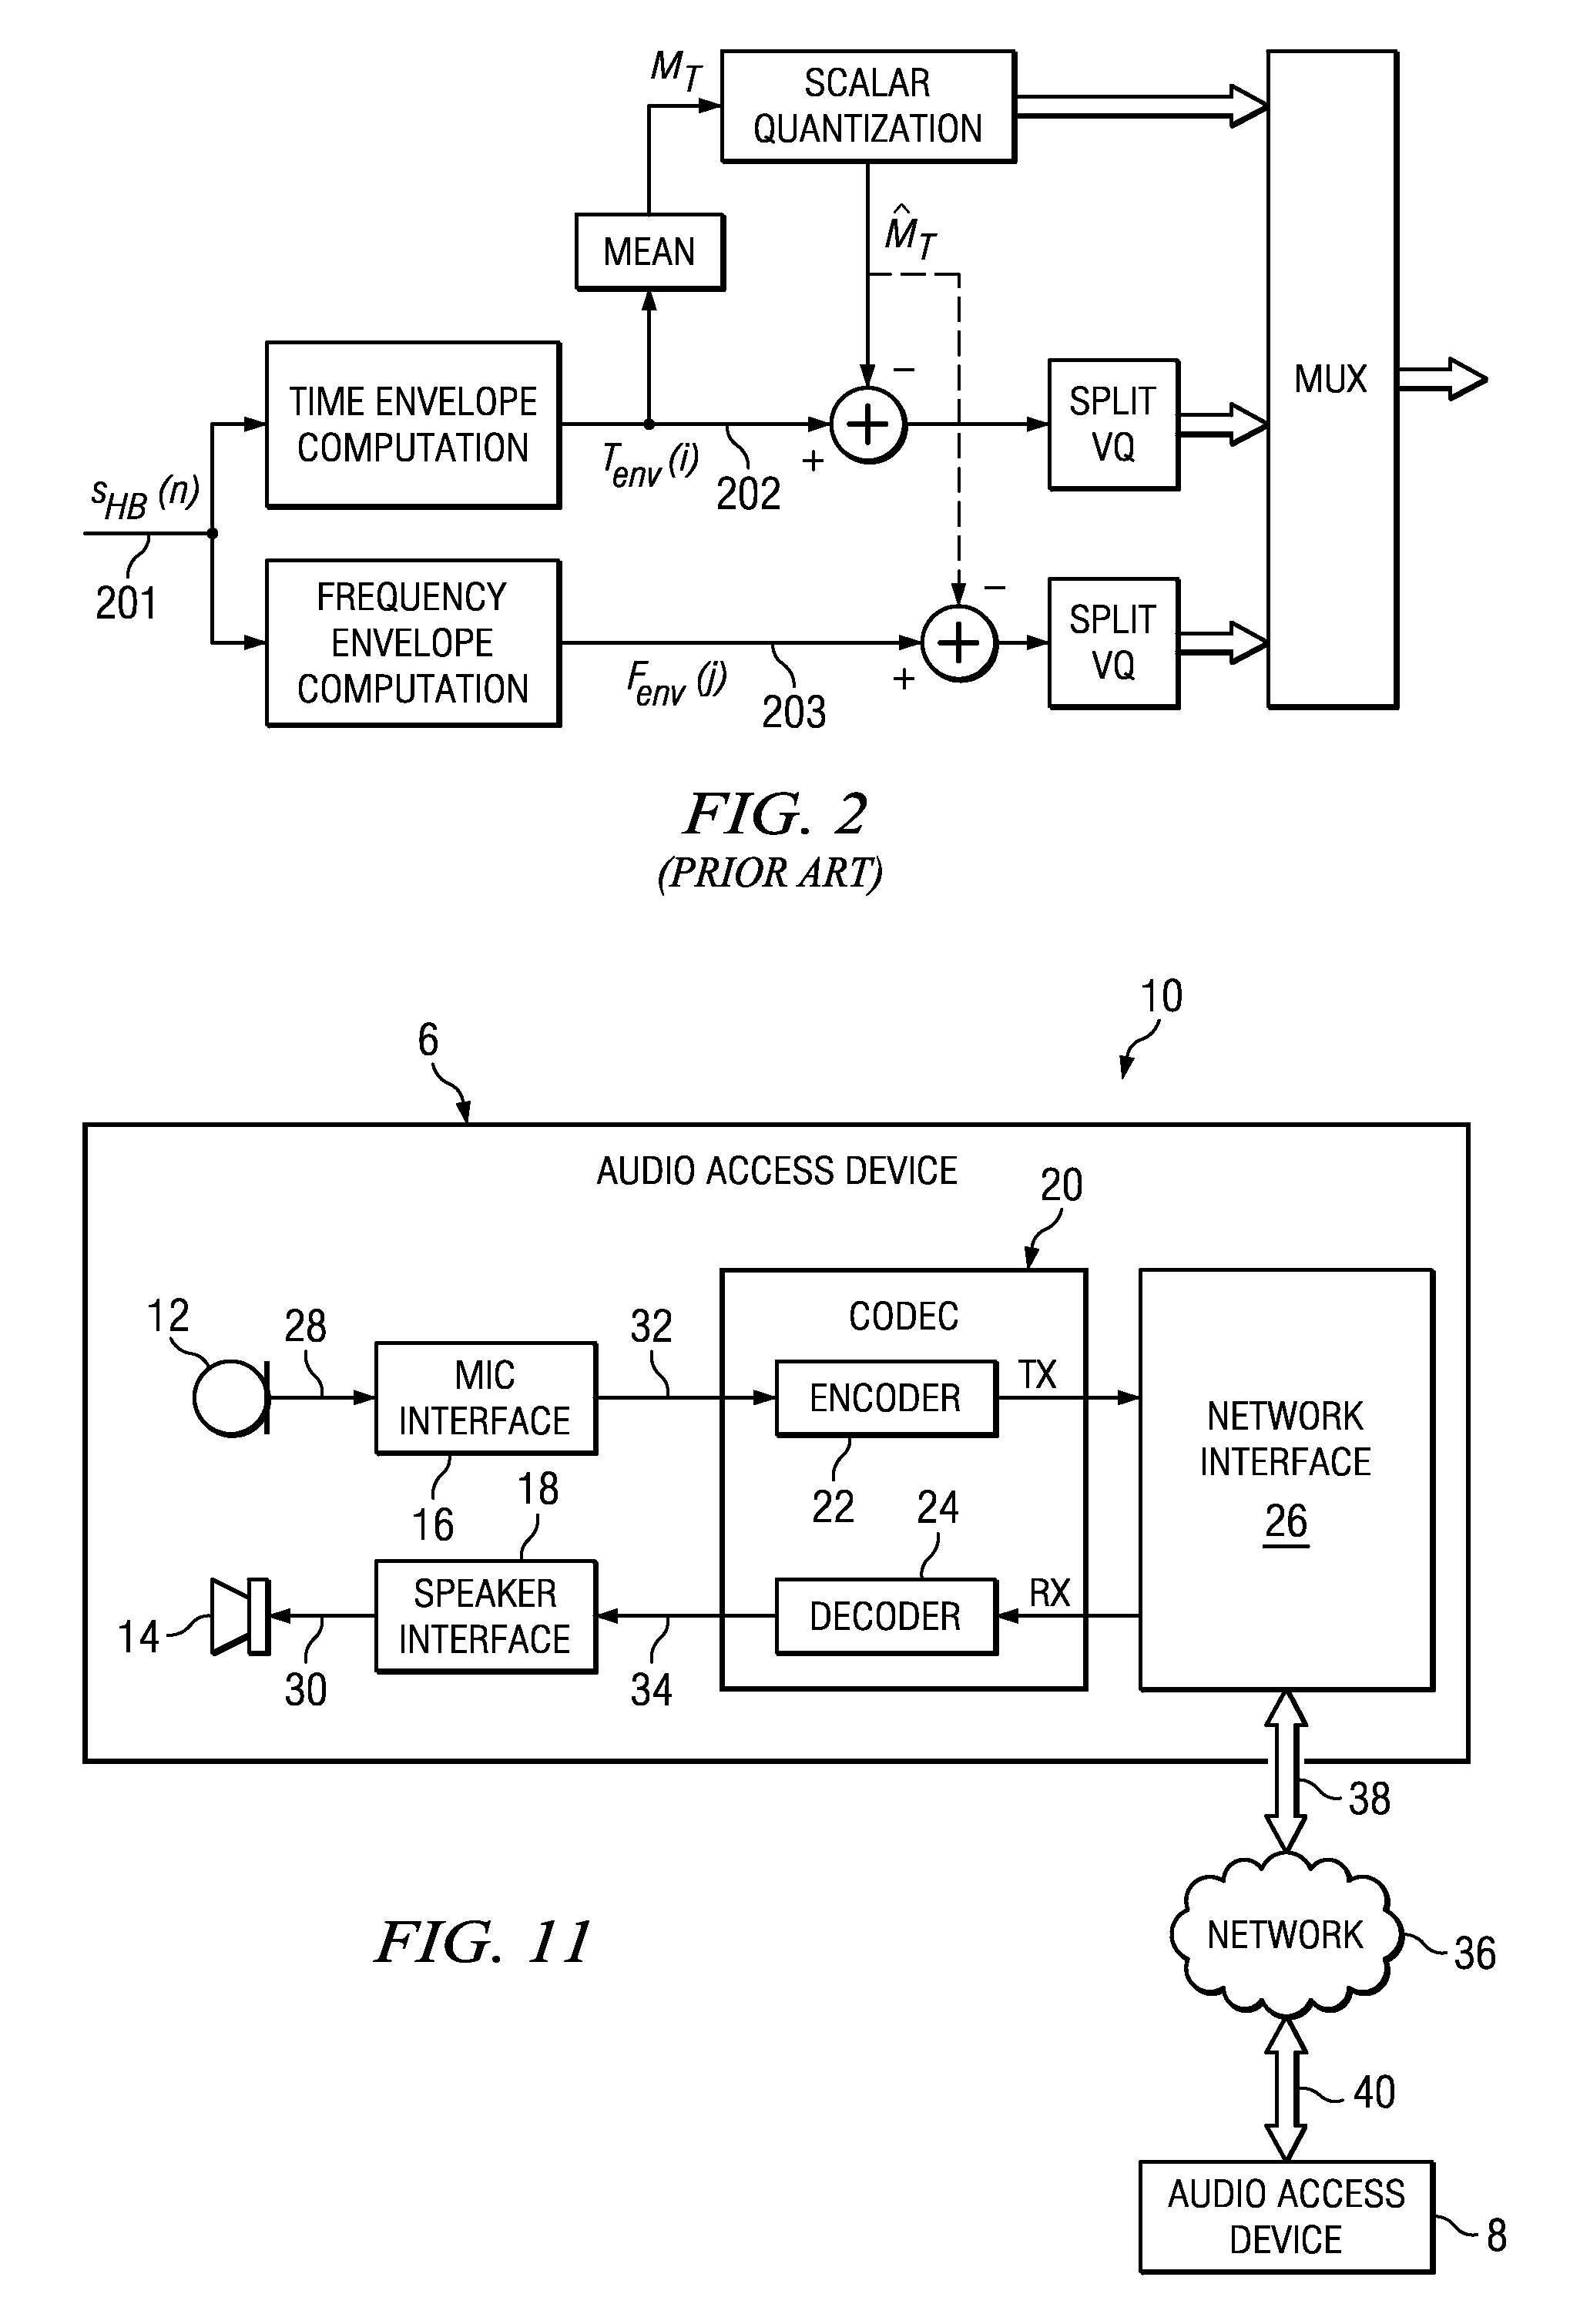 Adaptive frequency prediction for encoding or decoding an audio signal